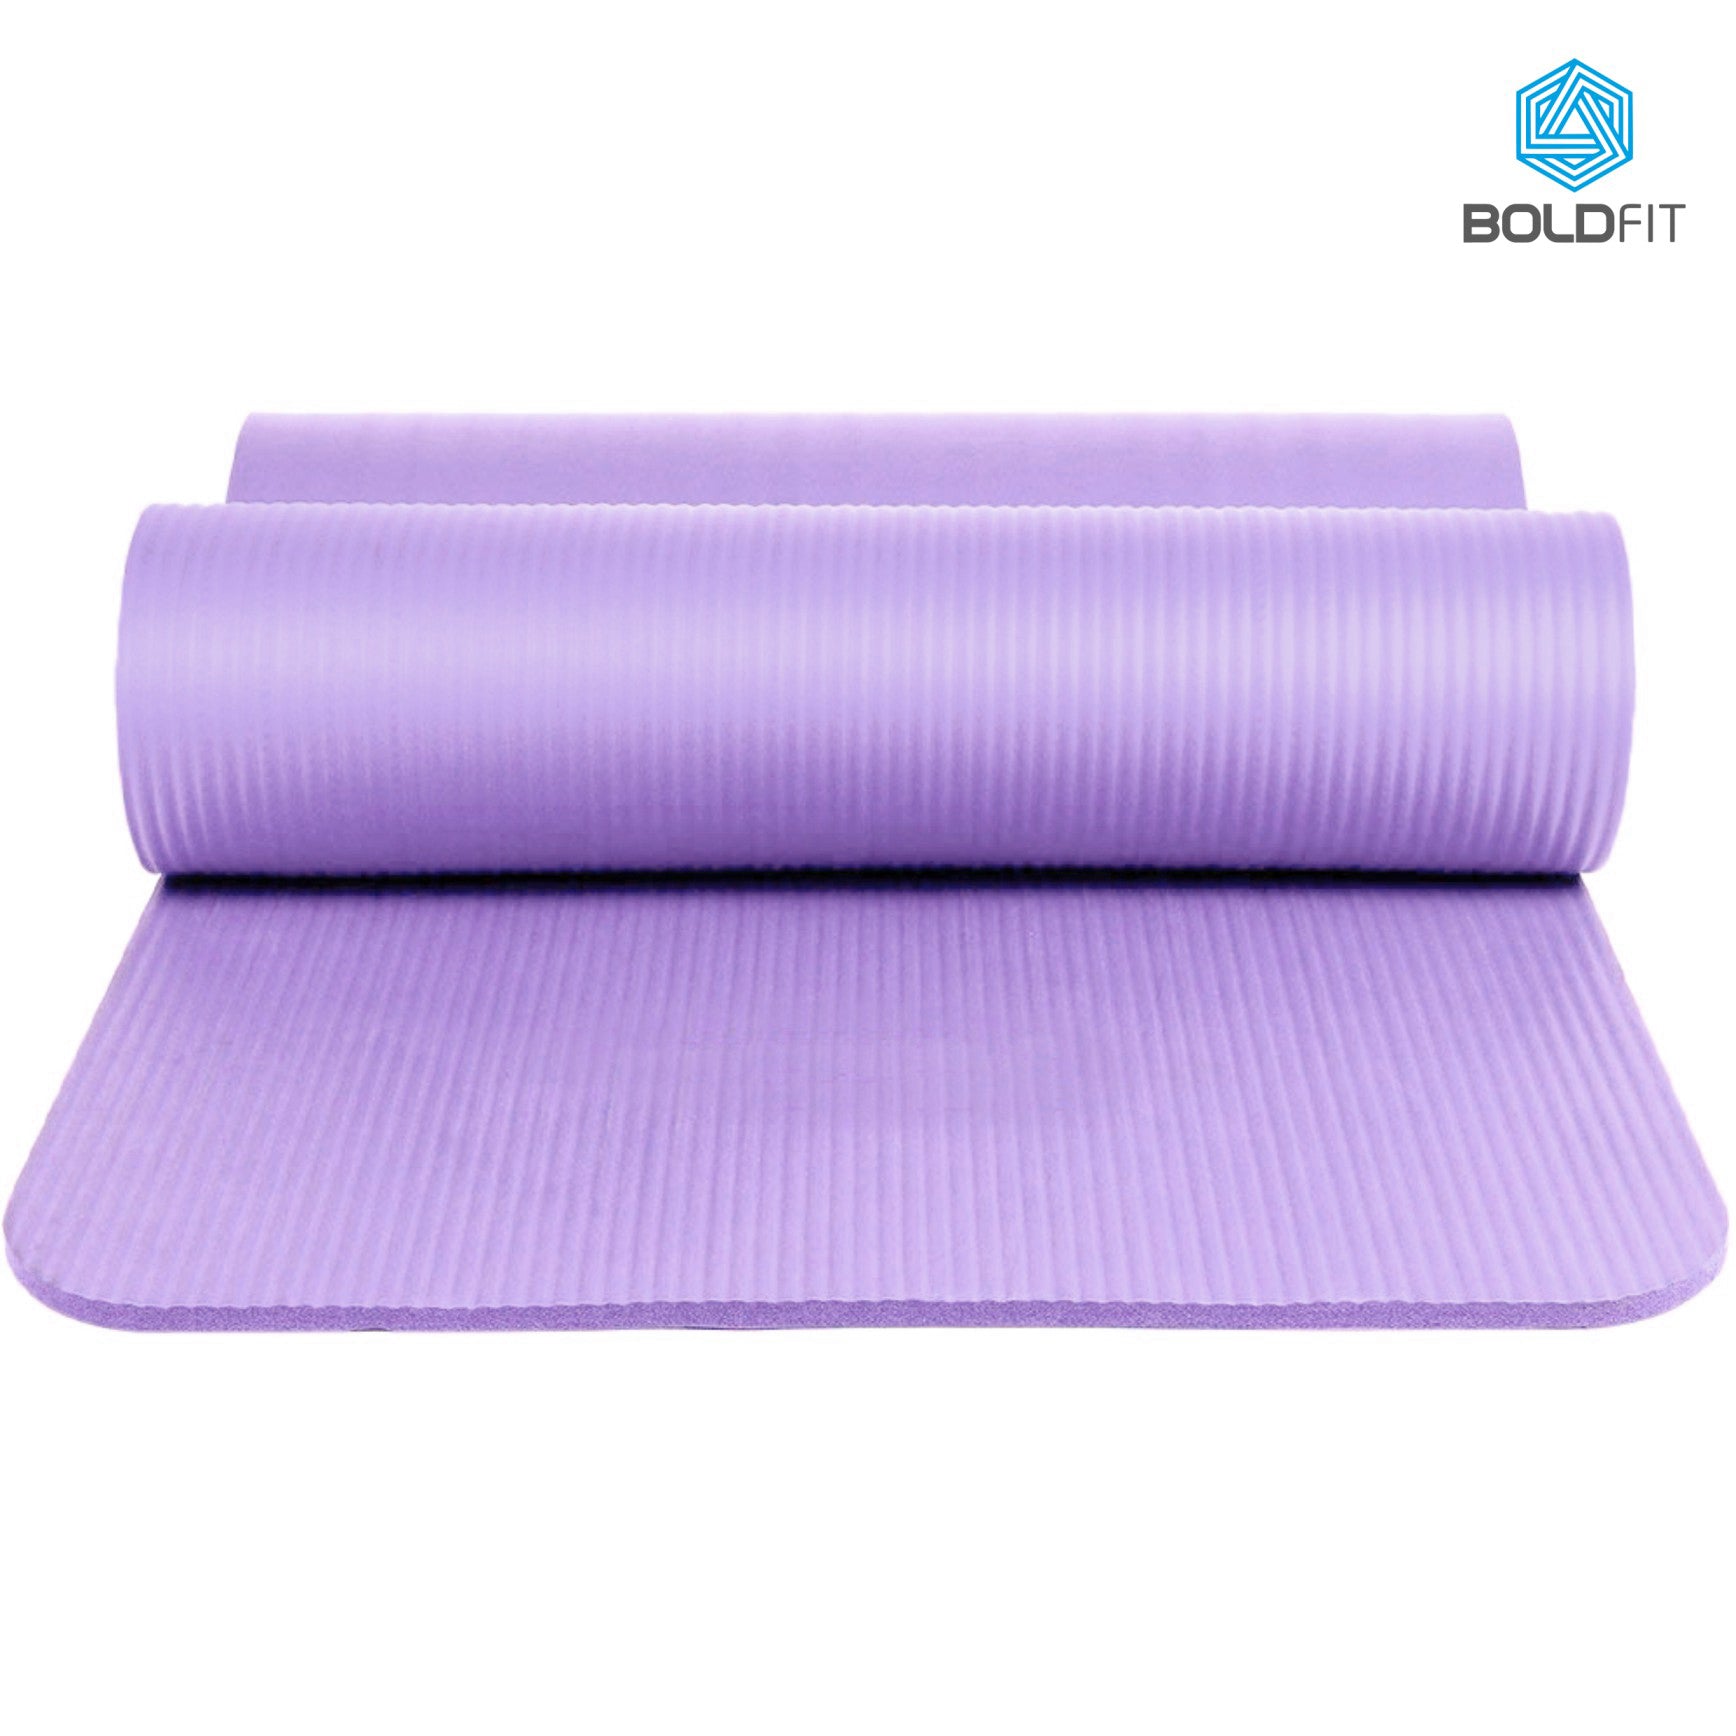 Boldfit Yoga Mats For Women&Men Nbr Material With Carrying Strap